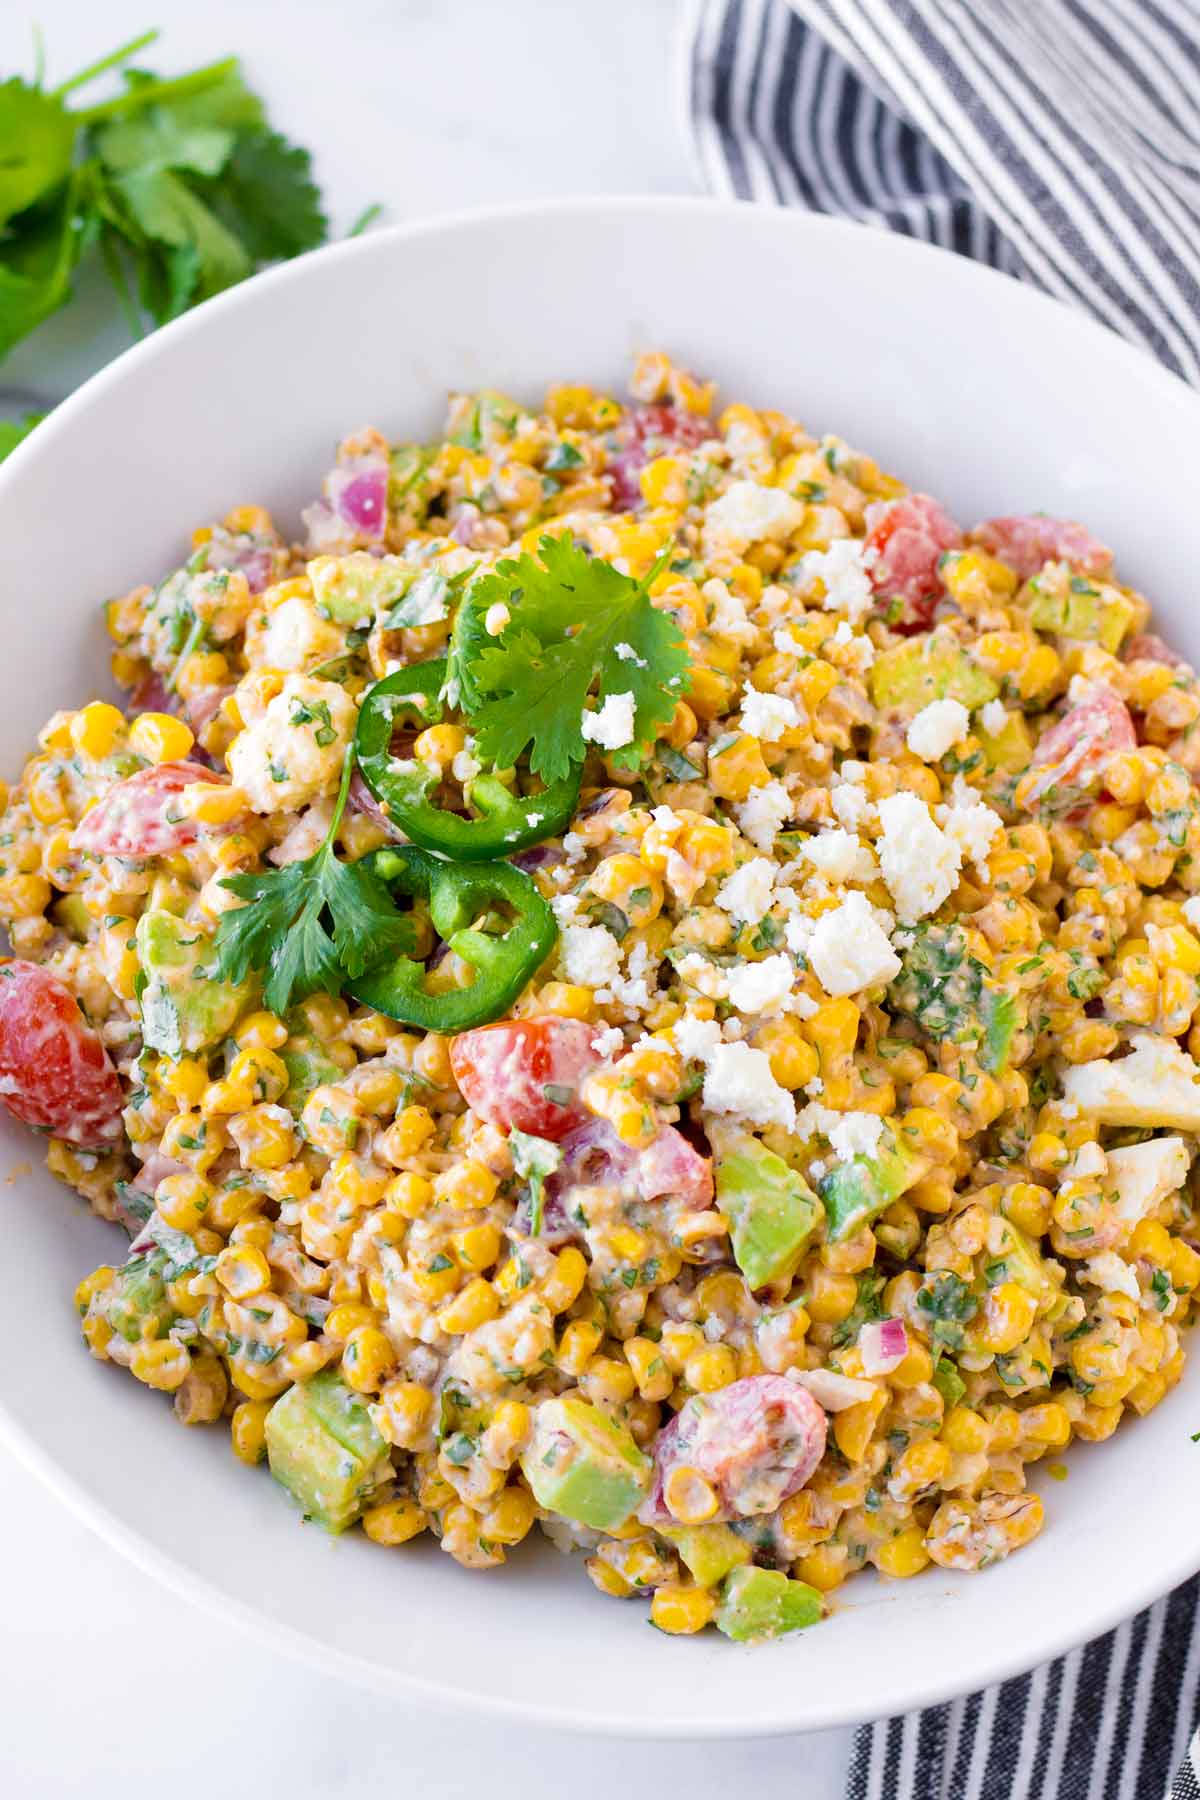 prepared creamy mexican style corn salad with cotija cheese